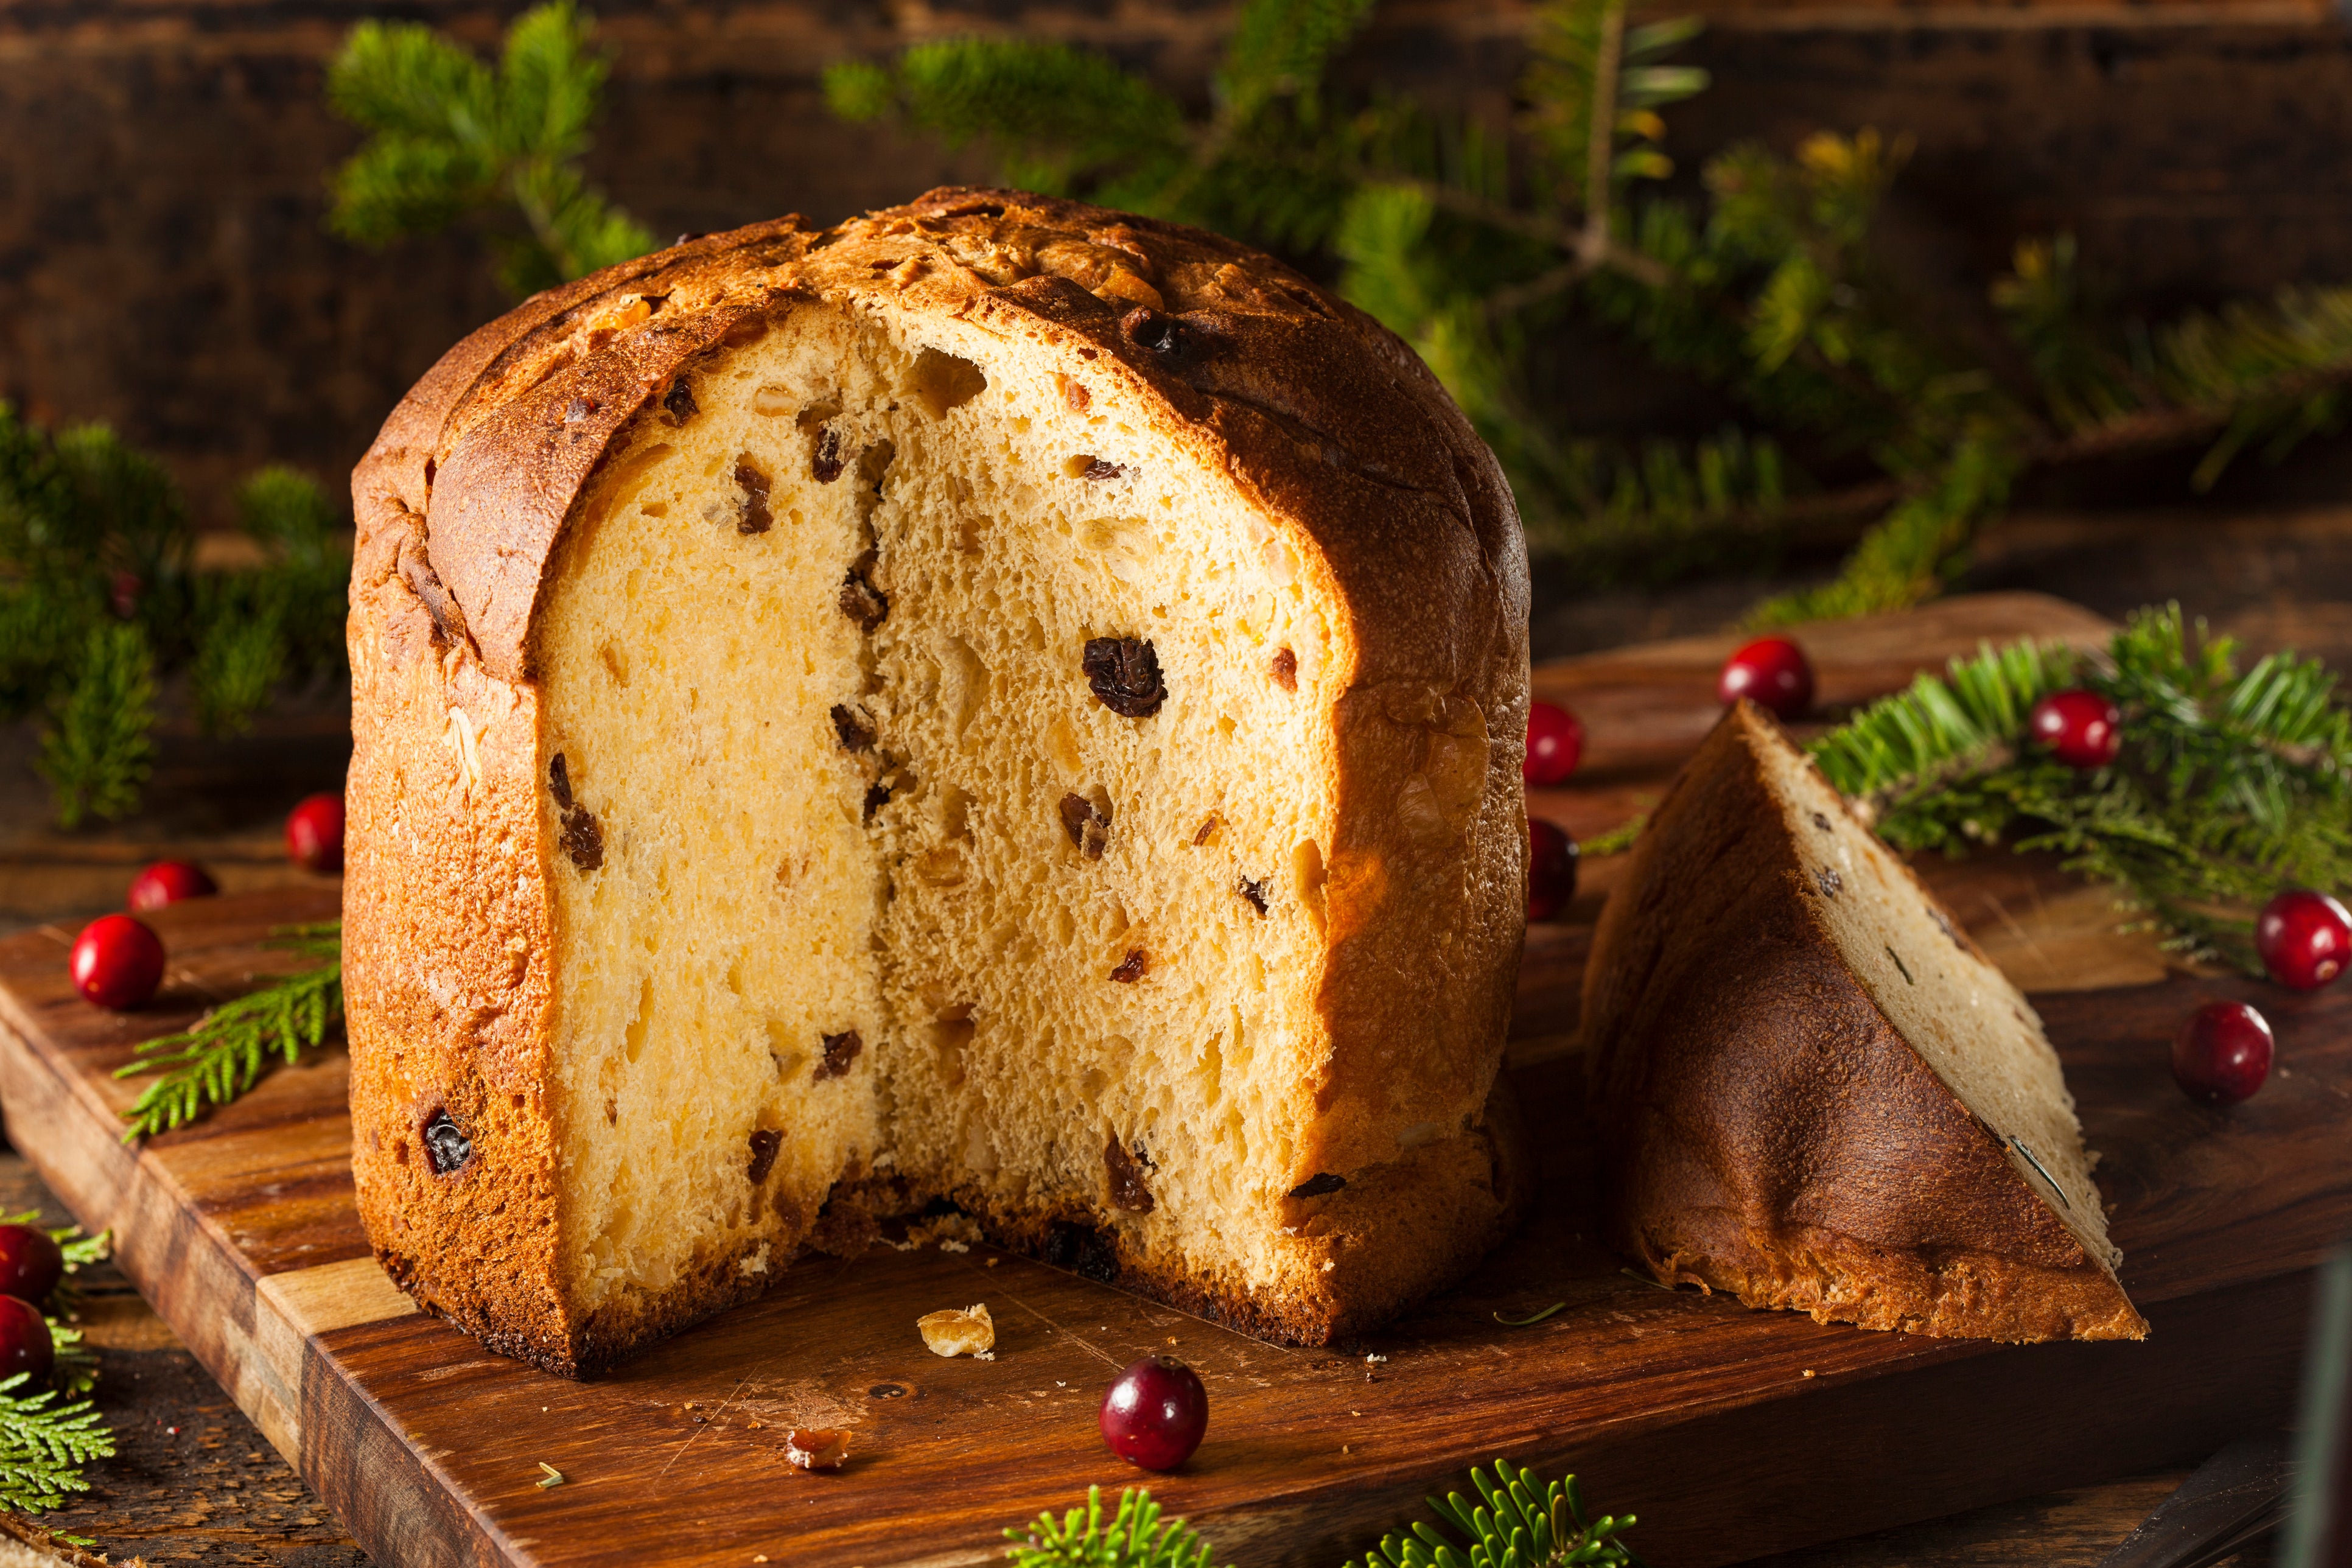 The price of a low-end panettone has gone up by 11 per cent compared to last year